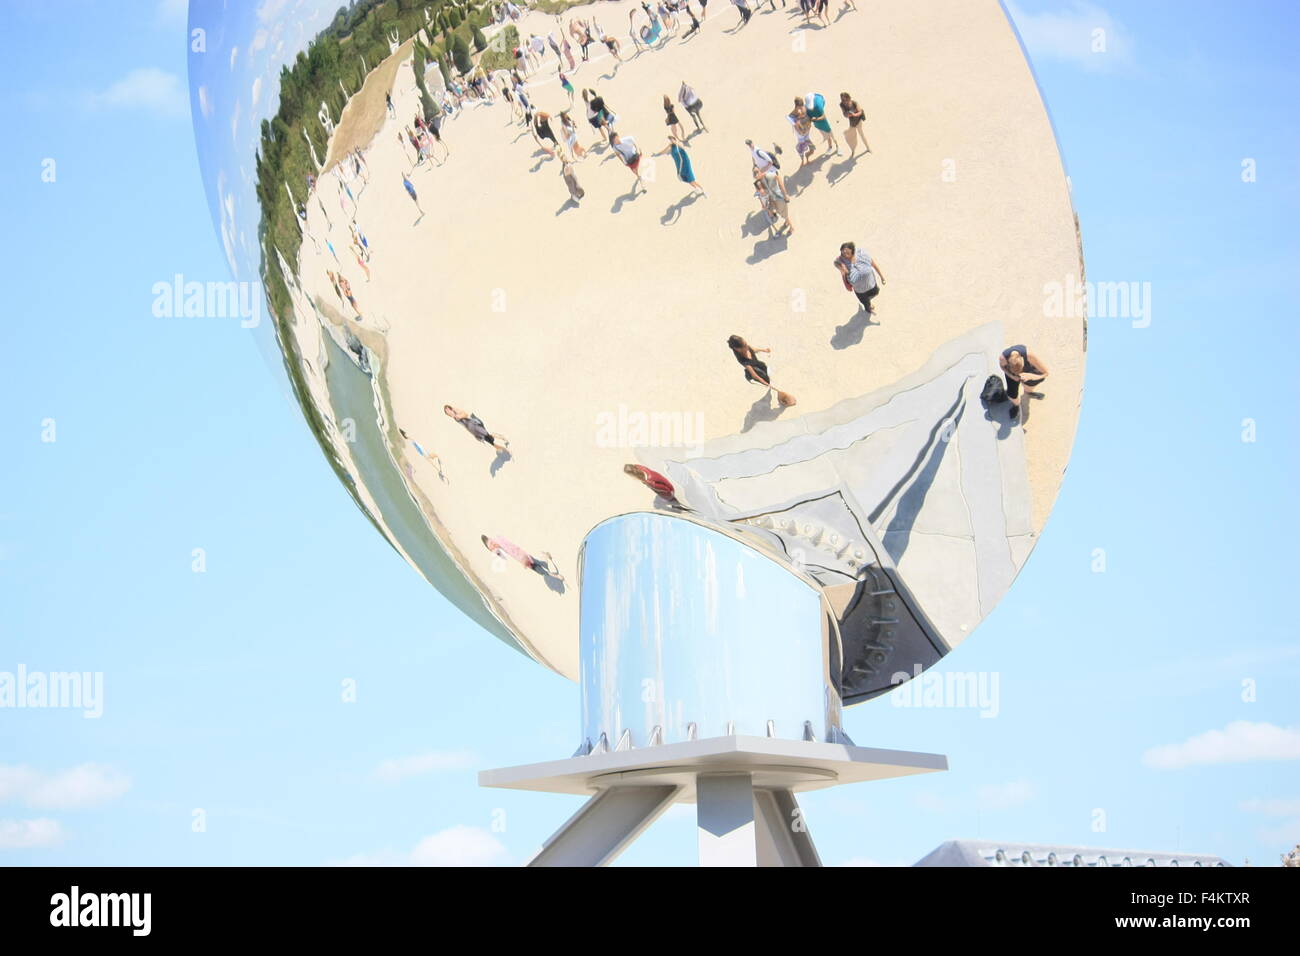 Reflections of unidentified tourists in the spherical mirror Stock Photo